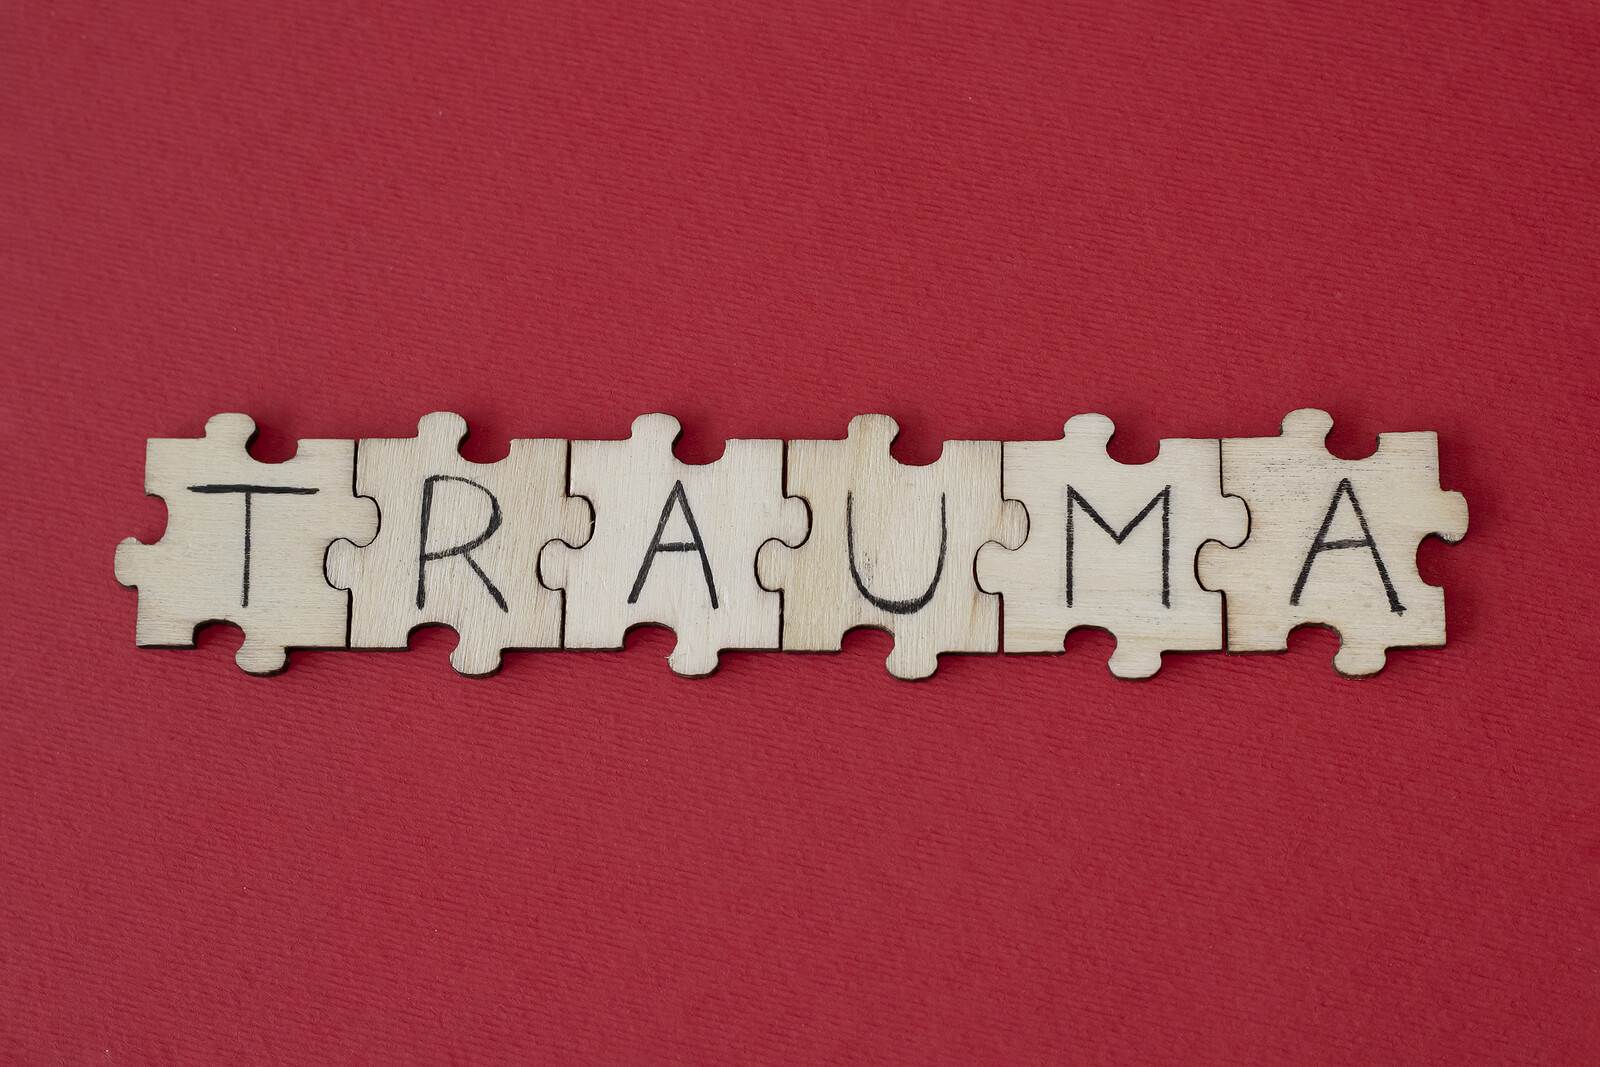 Wooden tiles spelling out Trauma on a red background. Trauma does not have to control your life. Therapy for Trauma in San Antonio, TX can help you find peace.